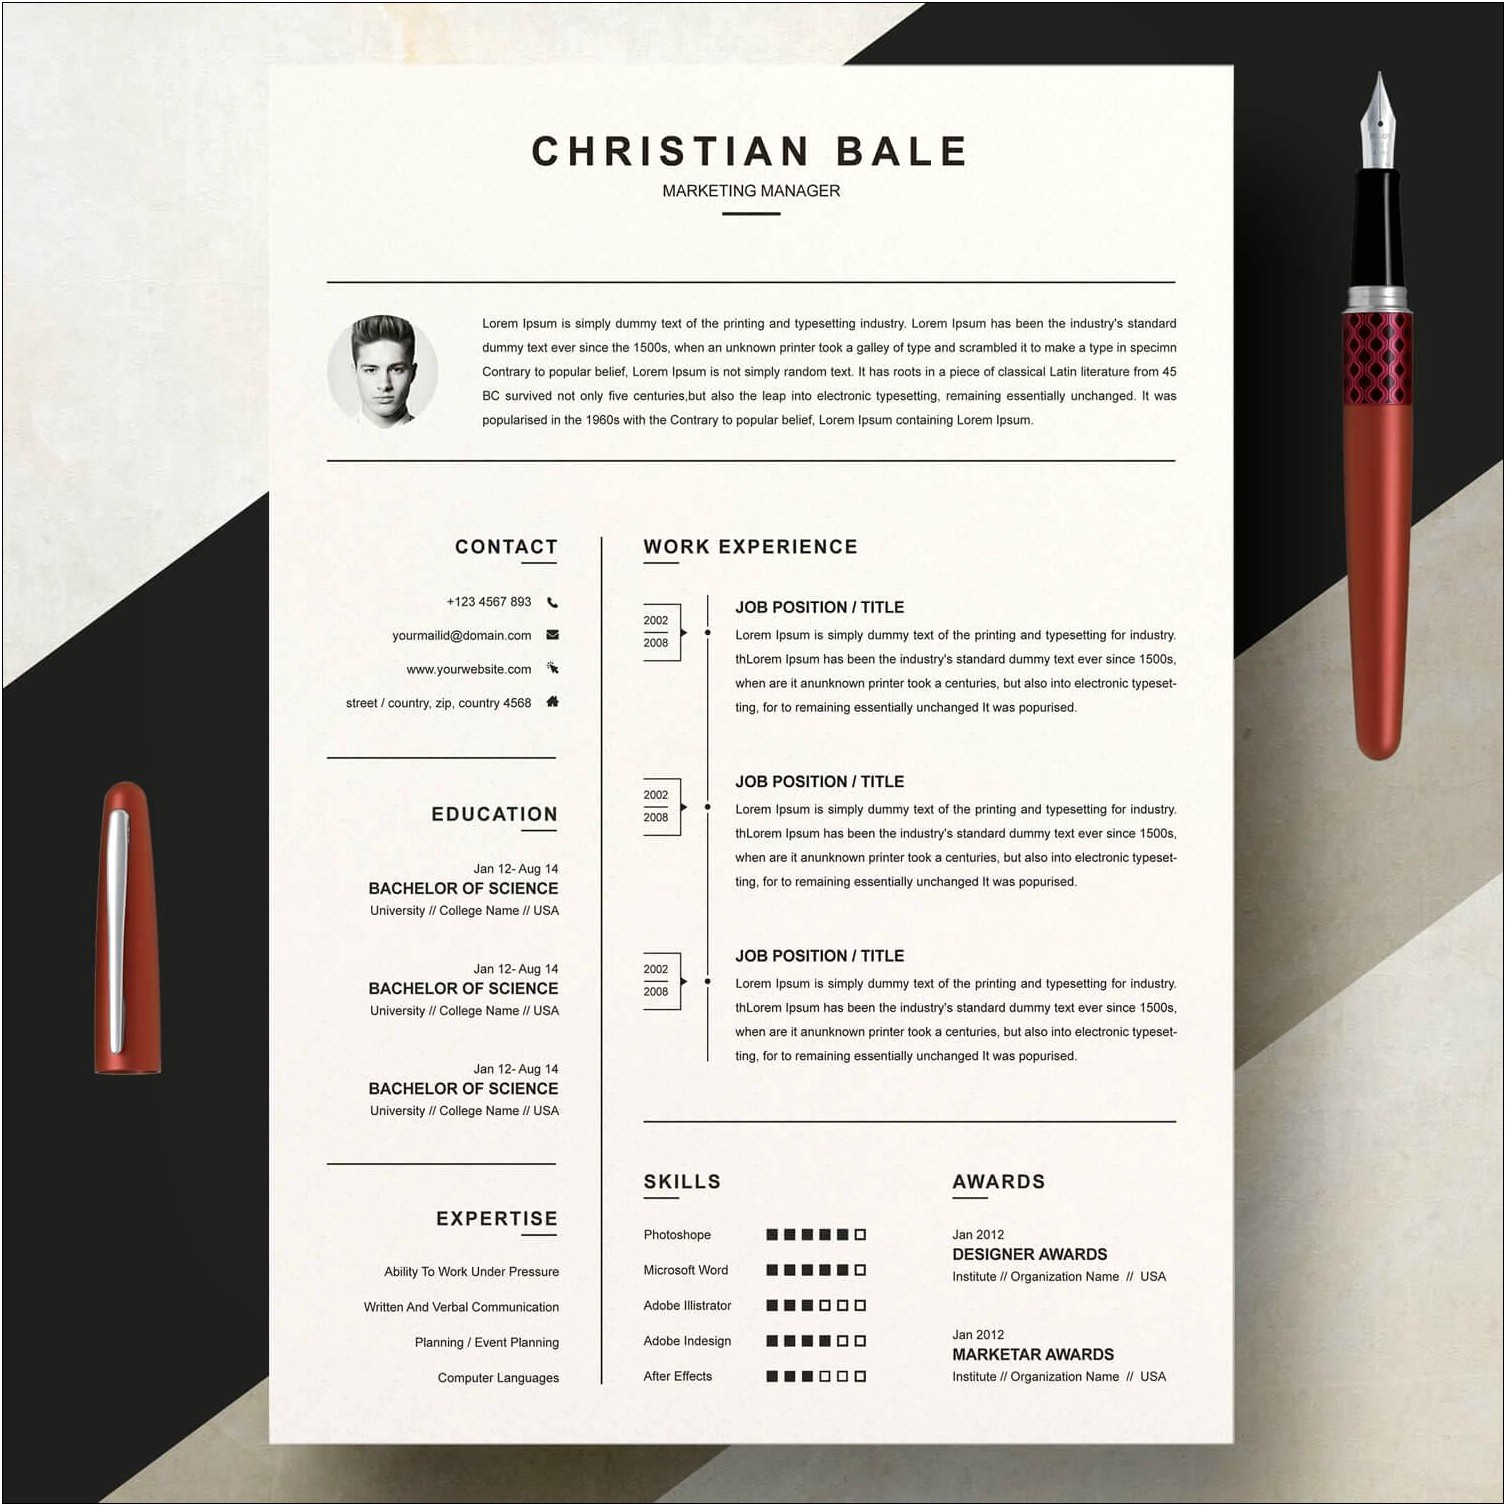 Free Resume Templates For Marketing Positions